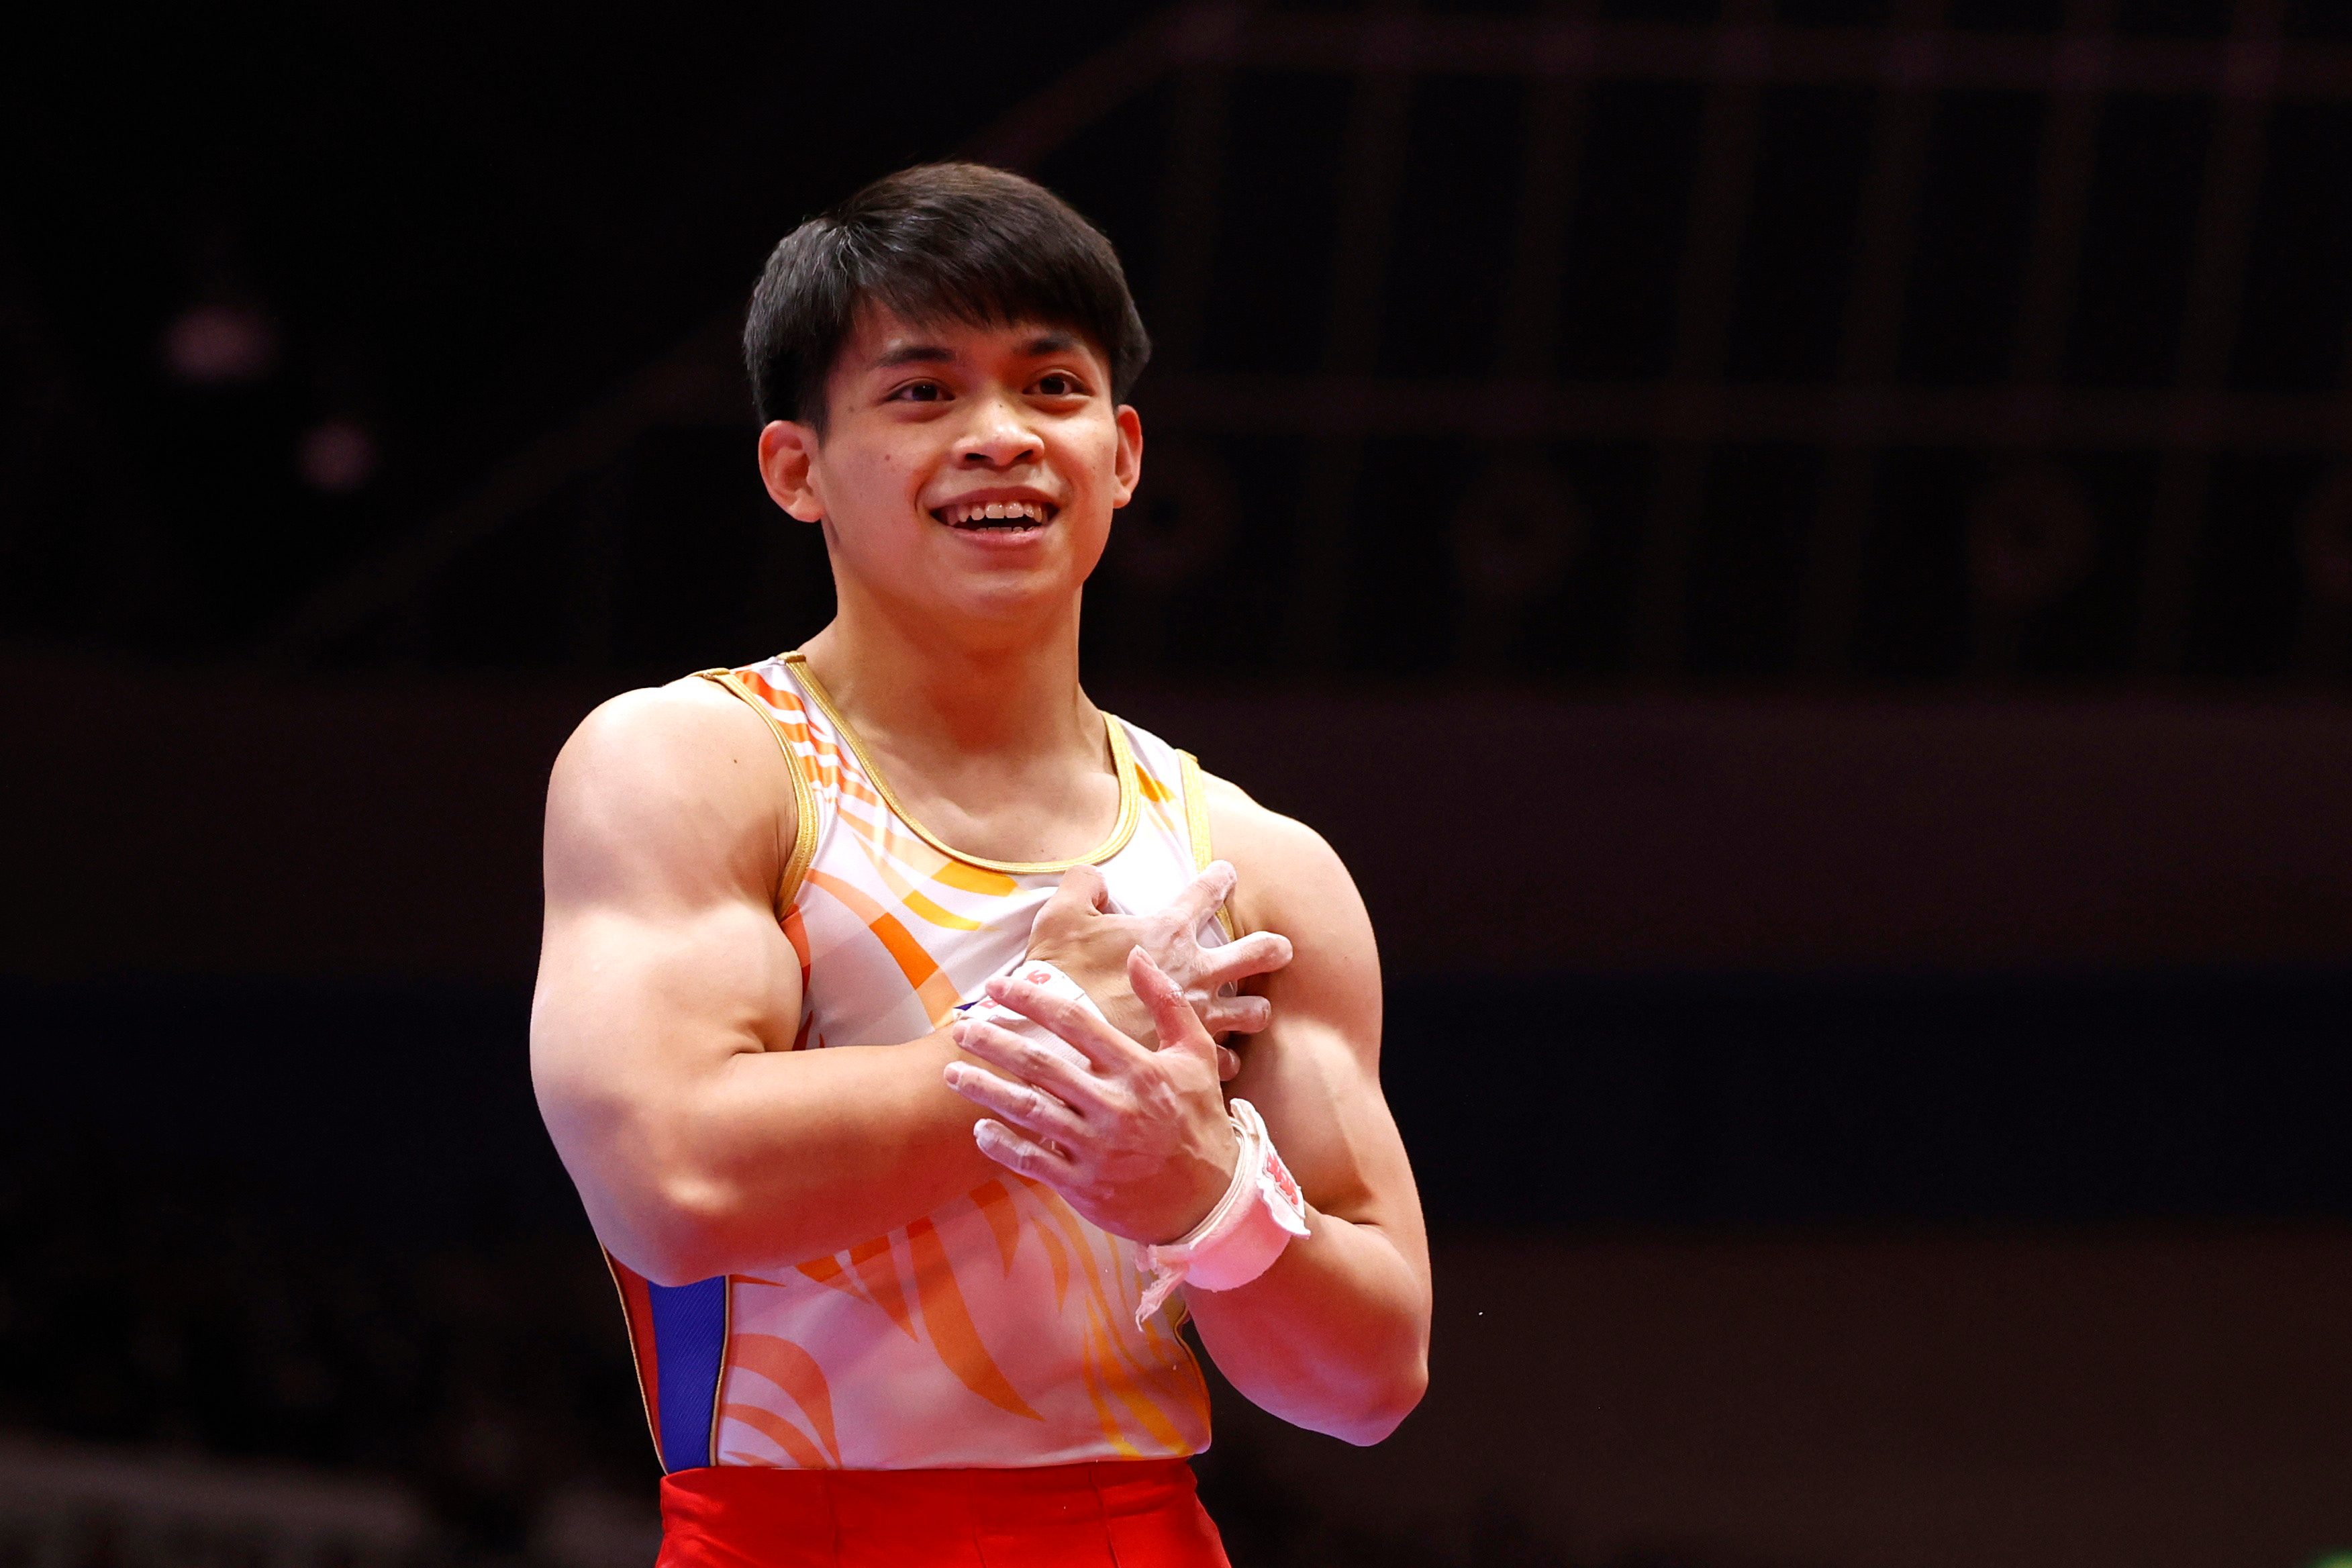 Carlos Yulo hits 4-gold prediction in SEA Games with vault triumph